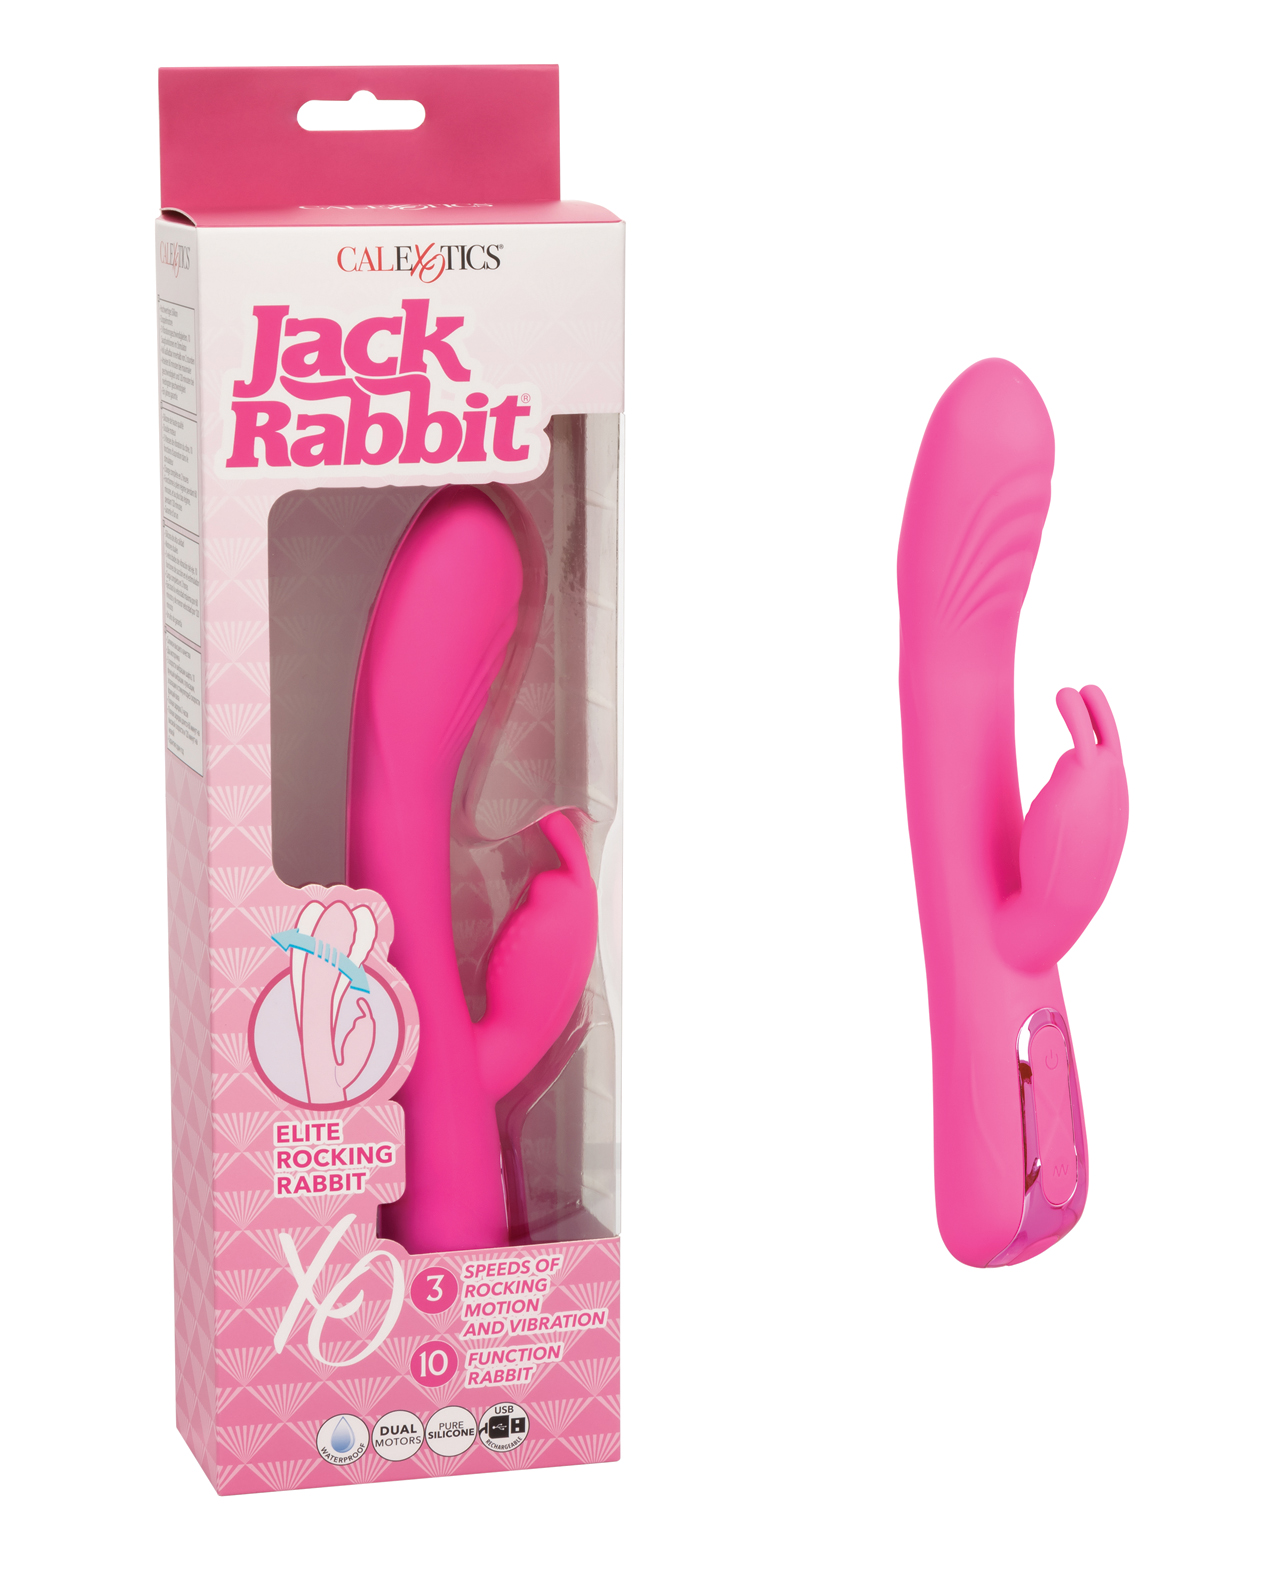 Pink Rocking Jack Rabbit toy sitting outside of its package.